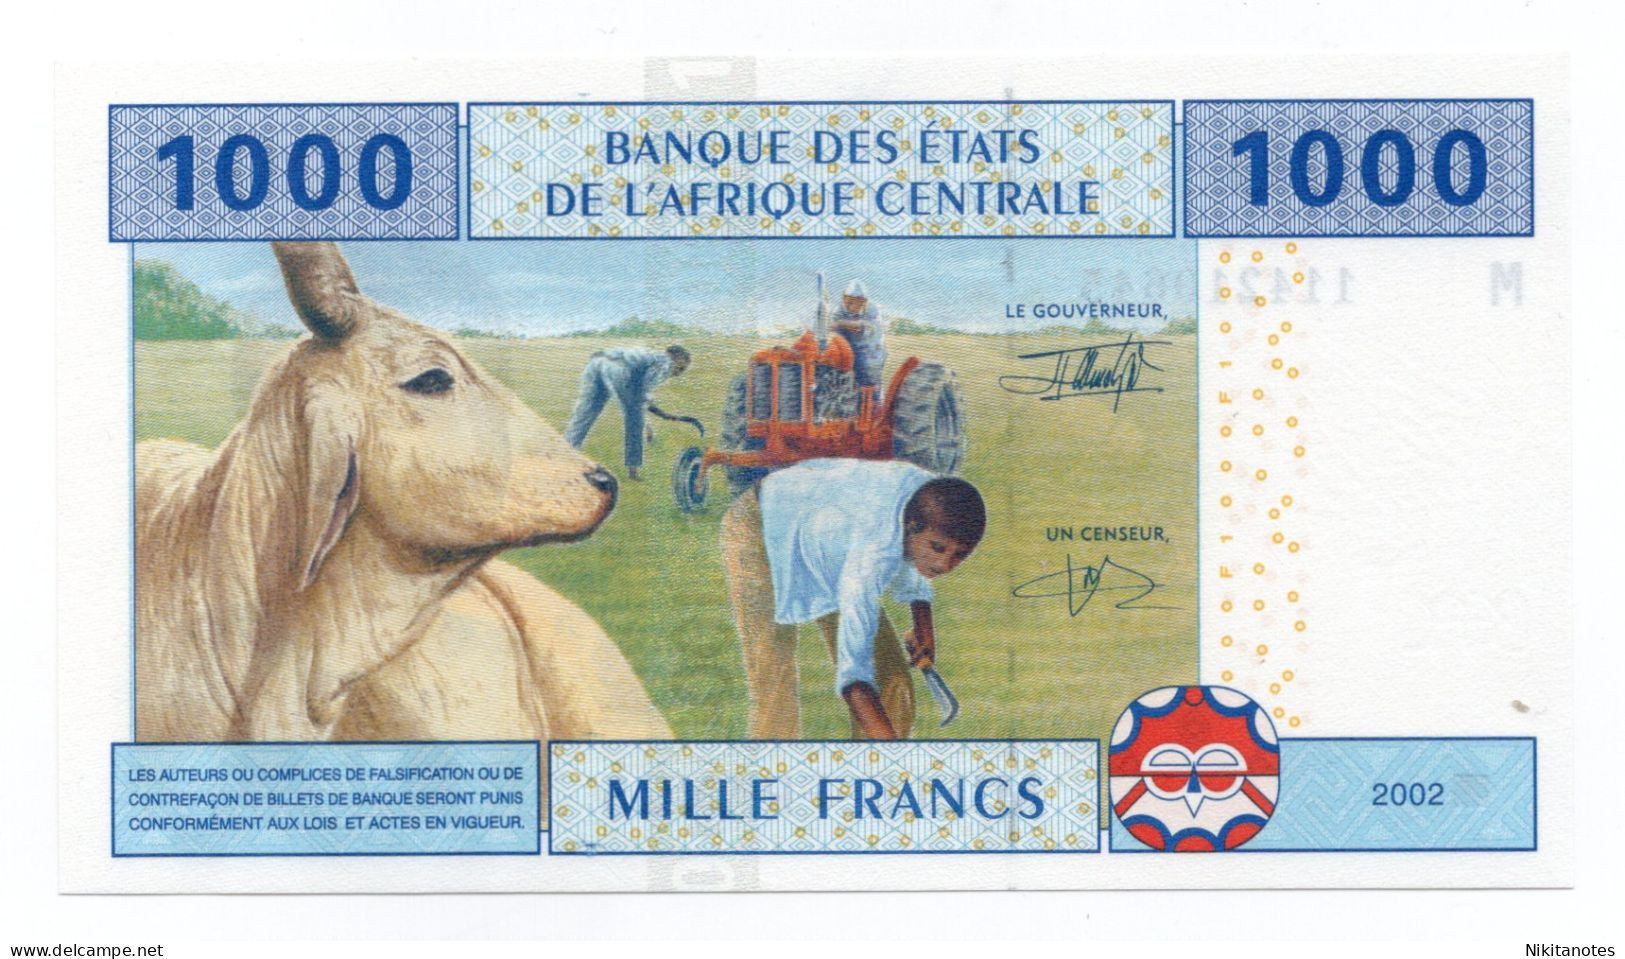 CENTRAL AFRICAN STATES (REPUBLIC) - 1000 FRANCS 2002 P 307 M UNC BANKNOTE - Centraal-Afrikaanse Republiek